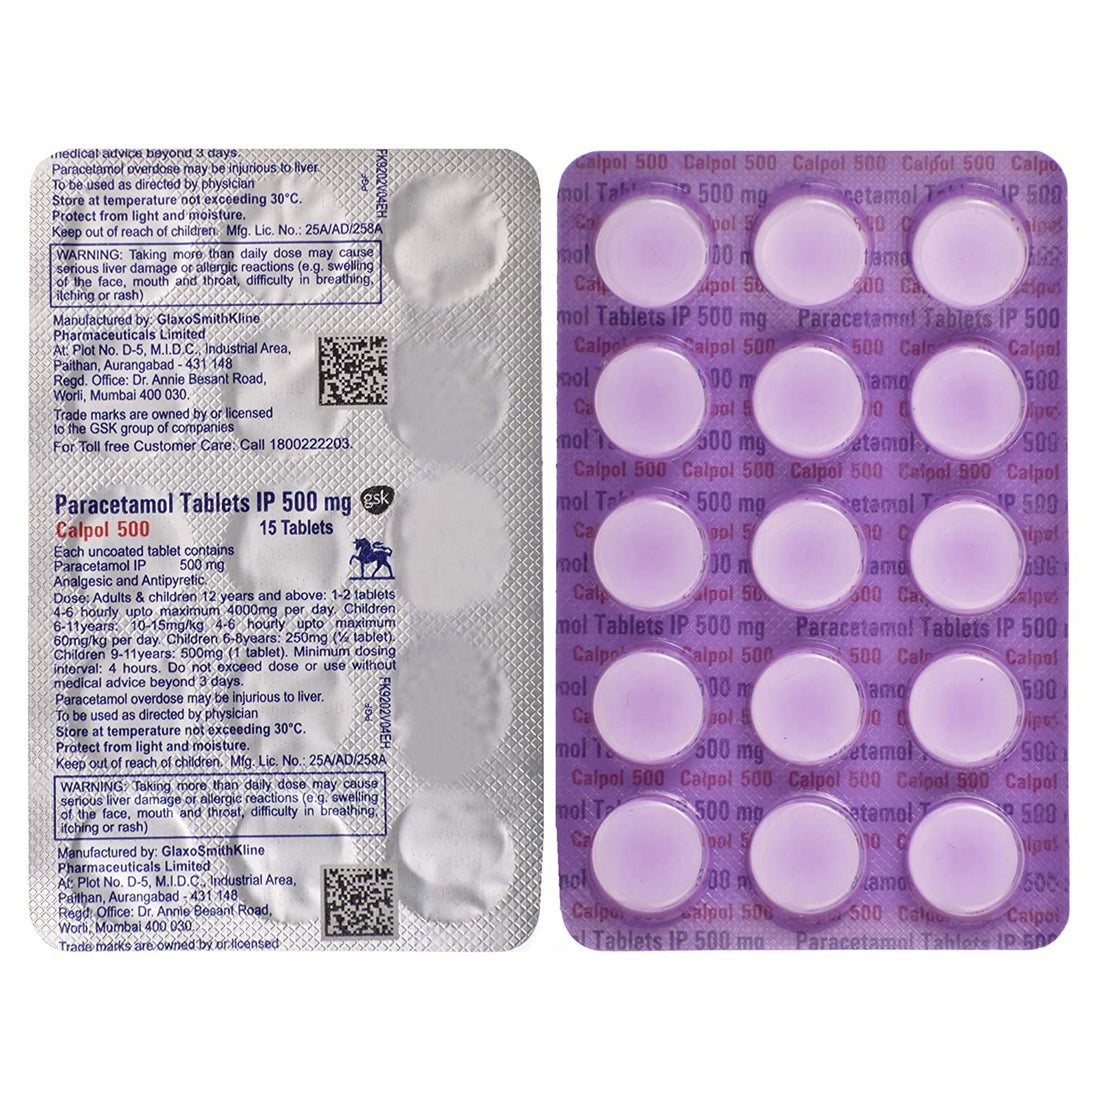 Shop Calpol 500  - Paracetamol Tablets IP 500mg - 15Tablets at price 15.04 from GSK Online - Ayush Care